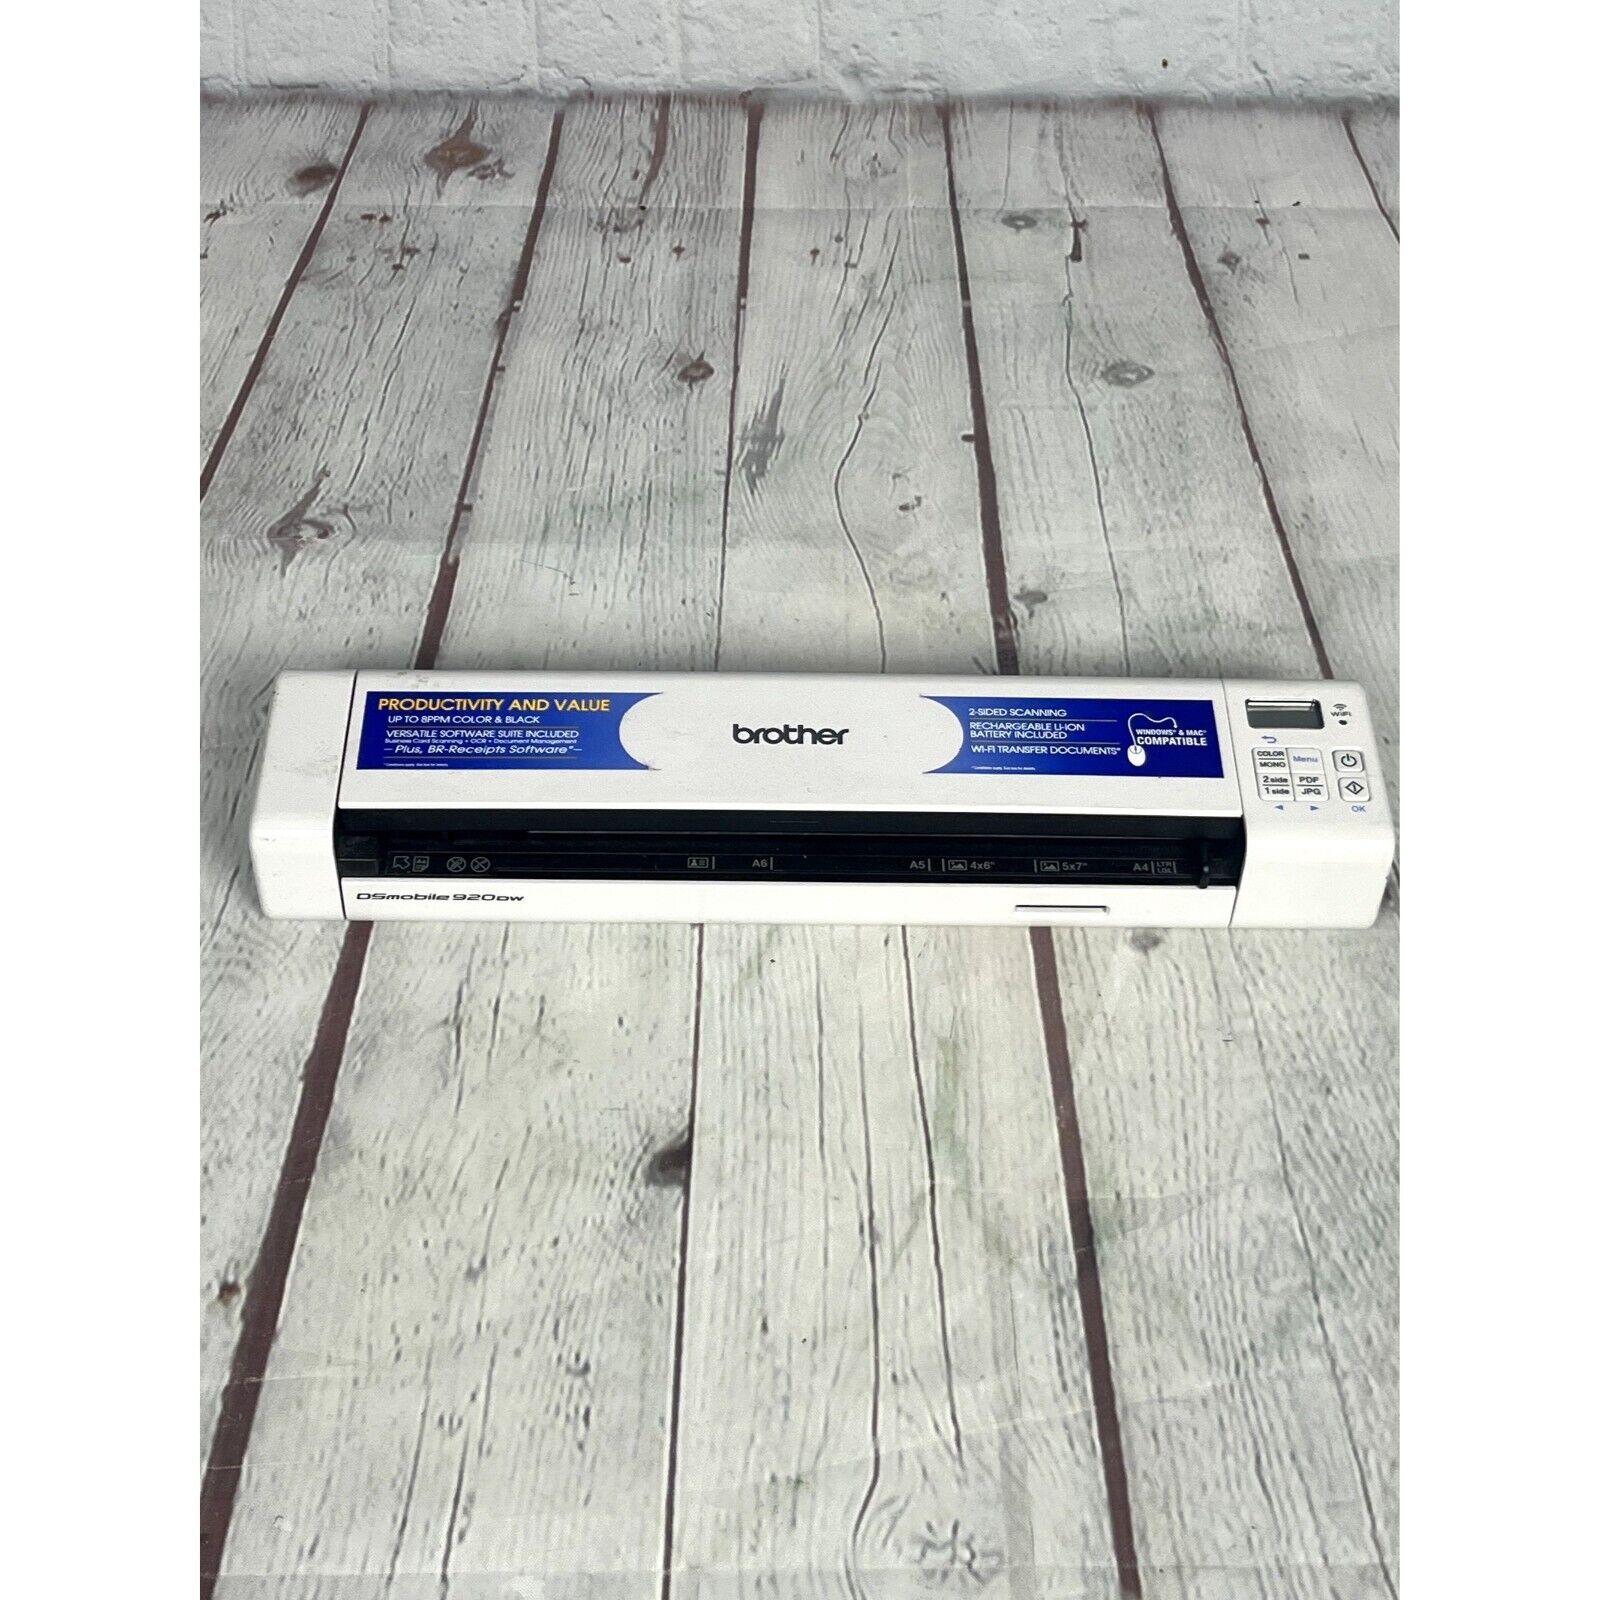 Brother DSMobile 920DW DS-920DW Mobile Wireless Document Scanner